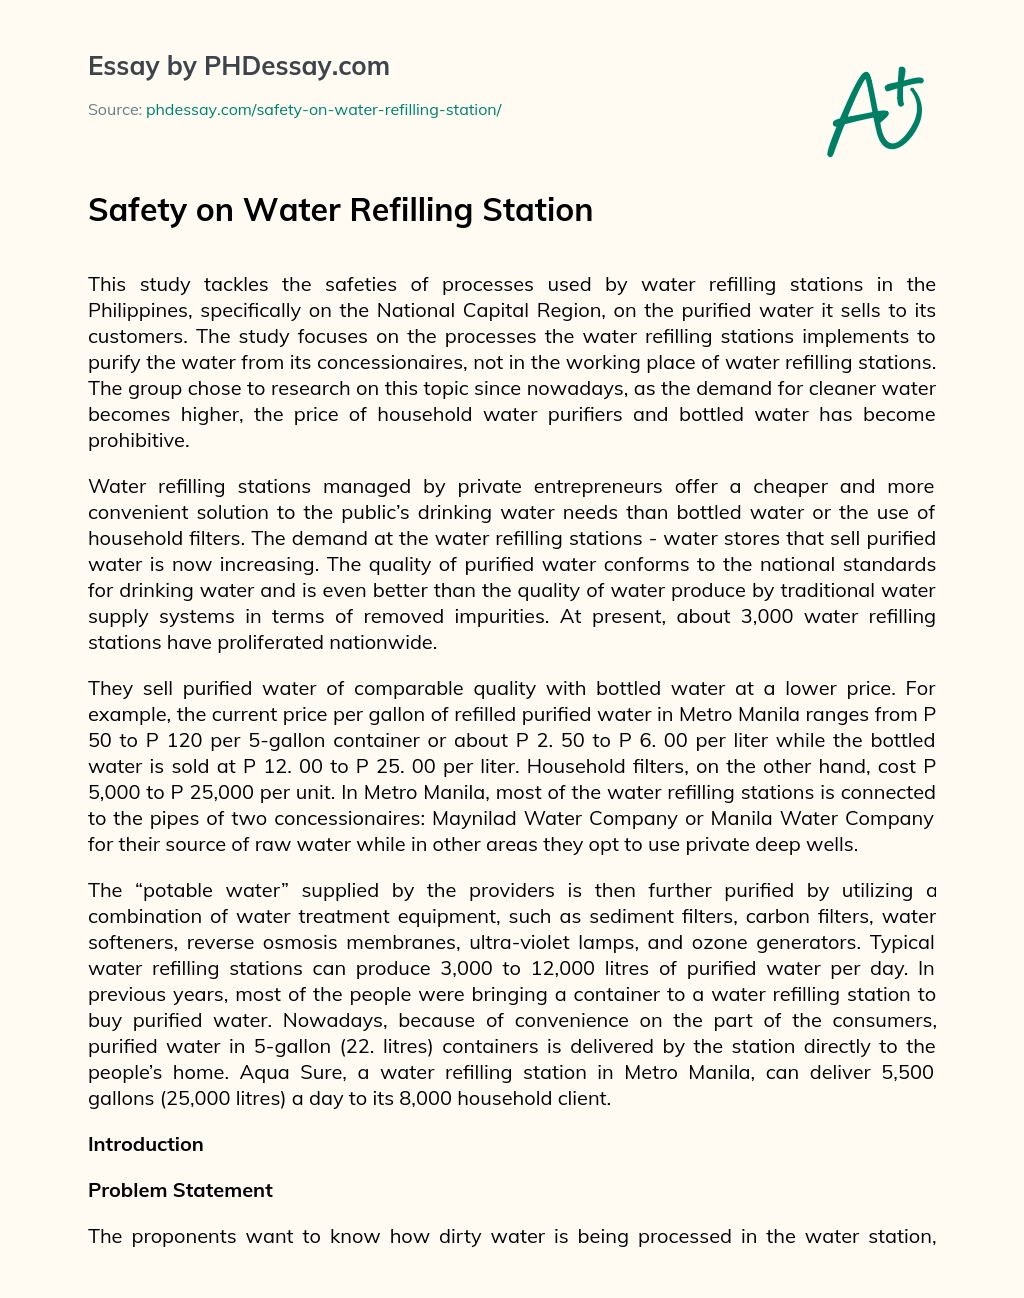 Safety on Water Refilling Station essay